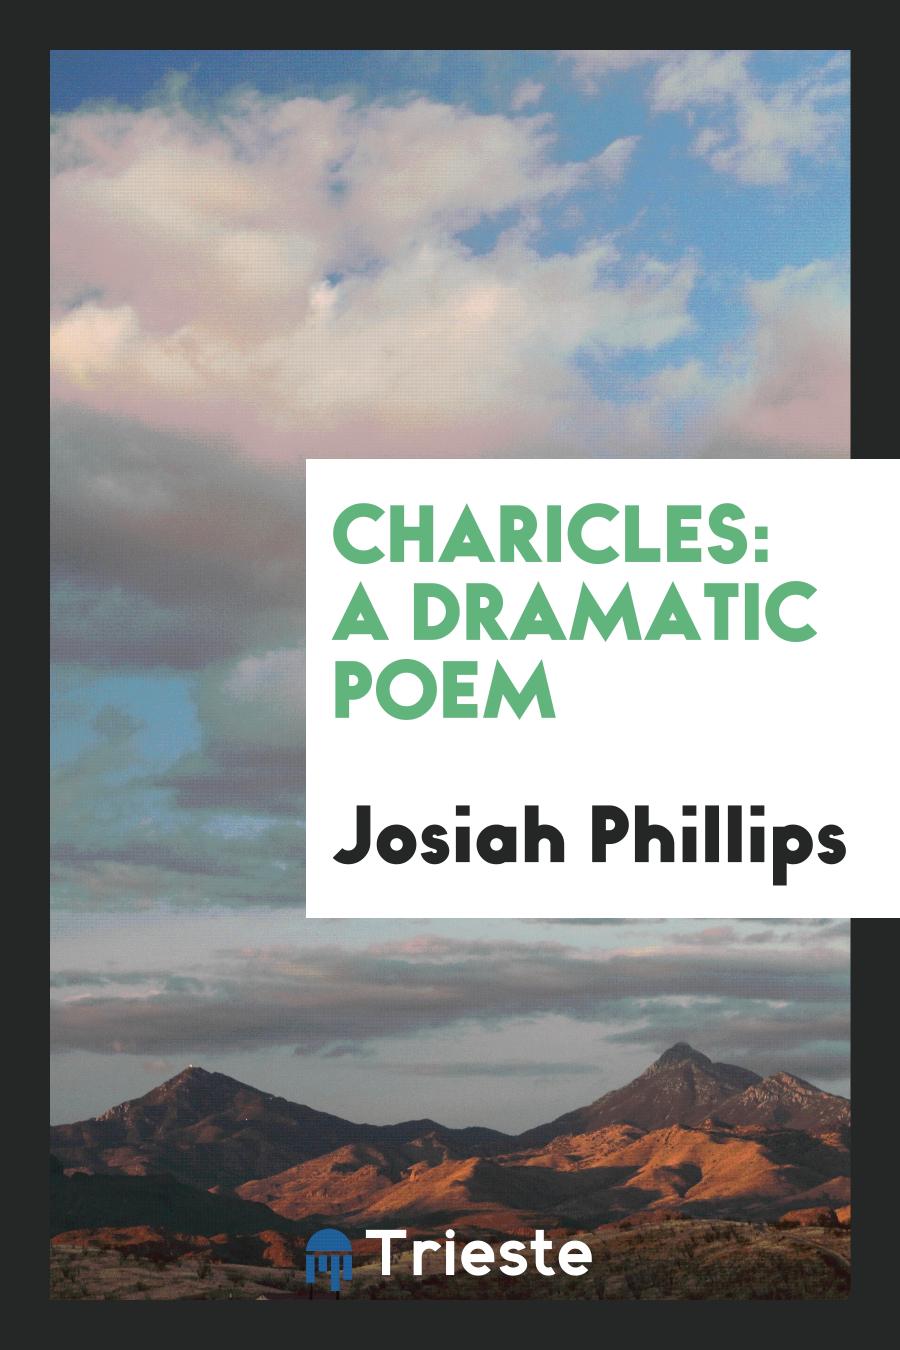 Charicles: A Dramatic Poem